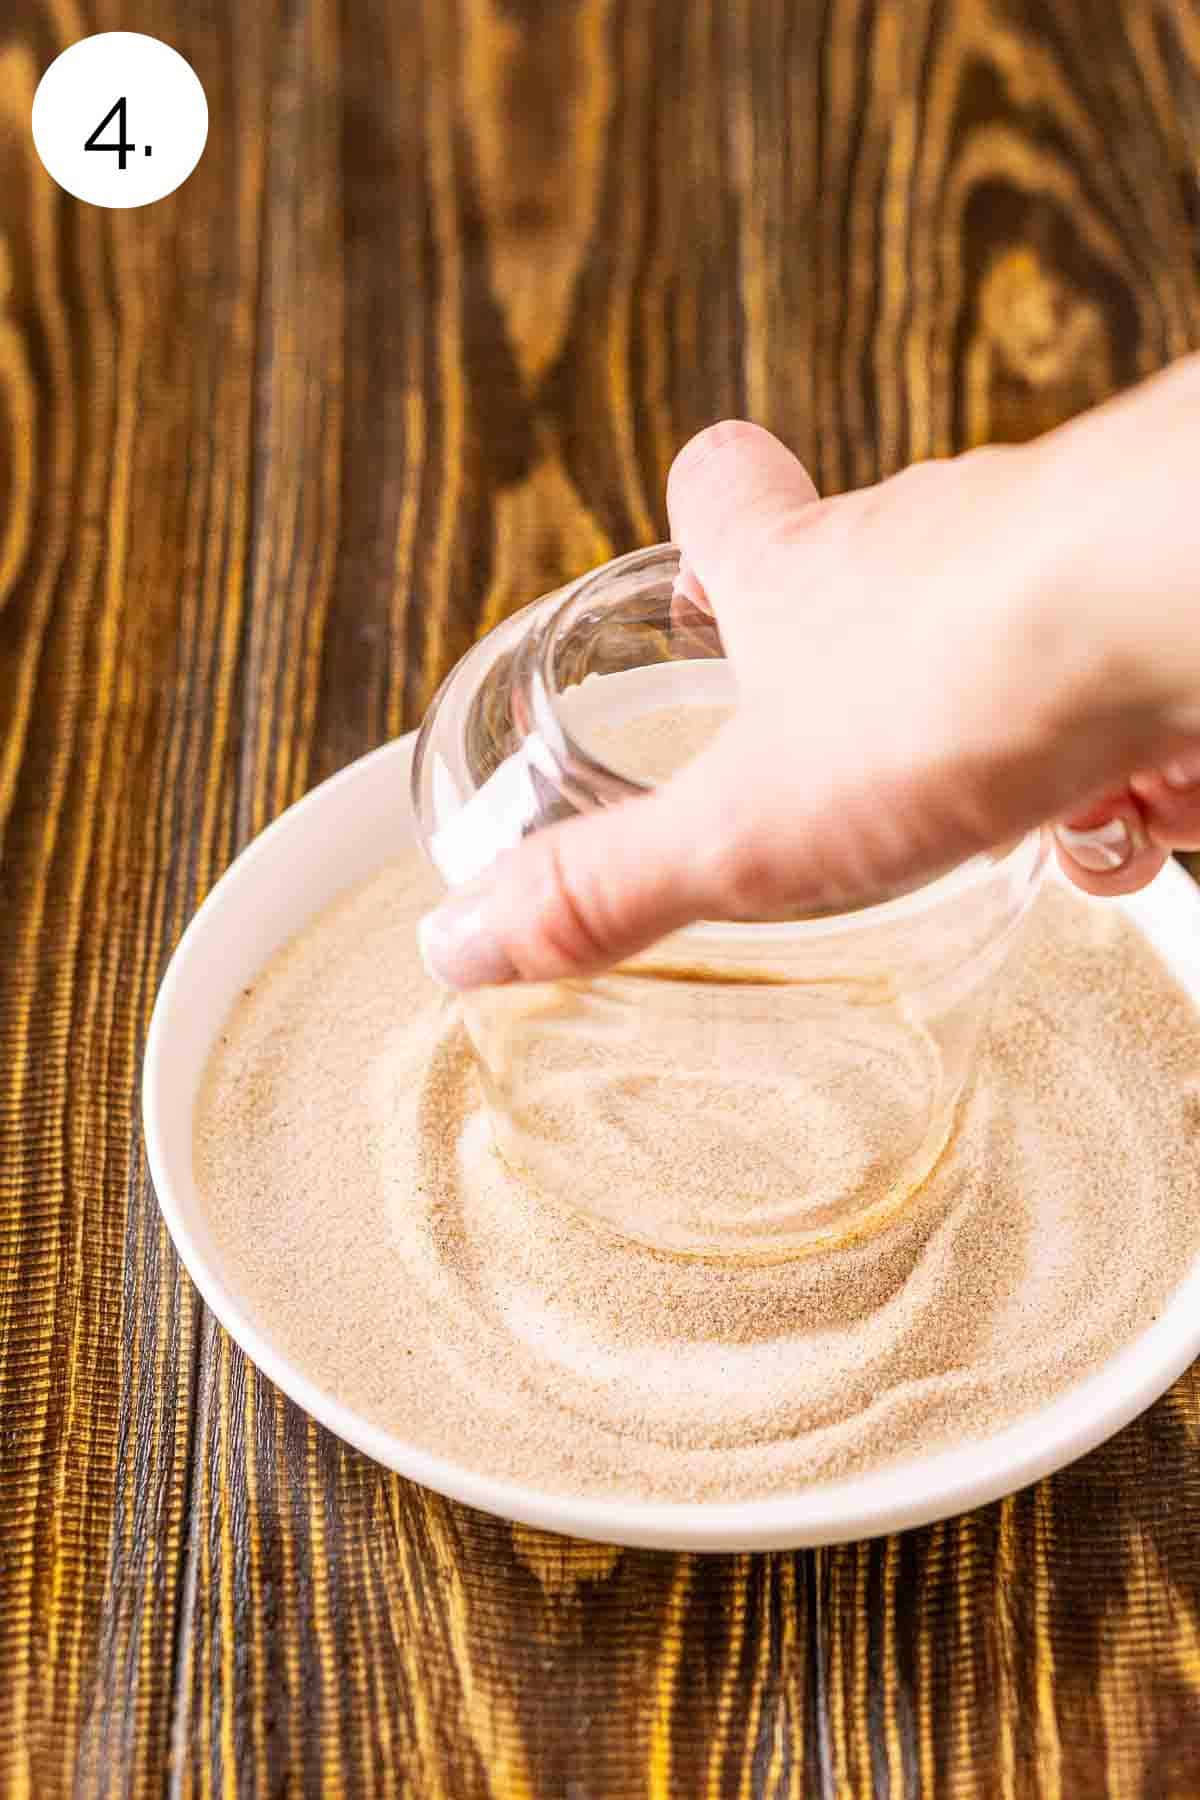 A hand dipping a glass into a mixture of cinnamon and sugar on a small white plate.